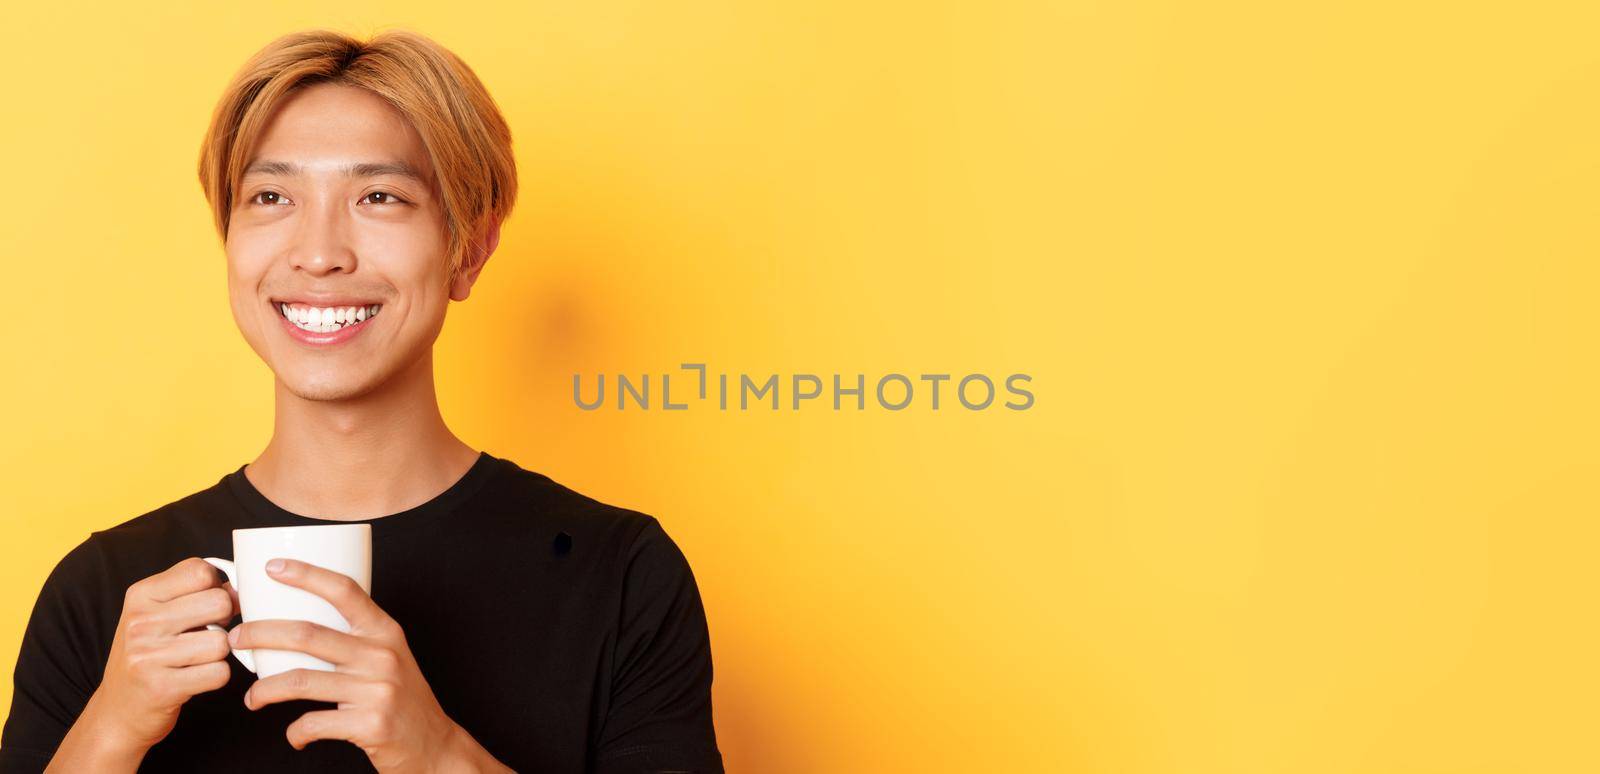 Close-up of happy smiling handsome blond asian guy, looking away with dreamy nostalgic look while drinking coffee, standing over yellow background.